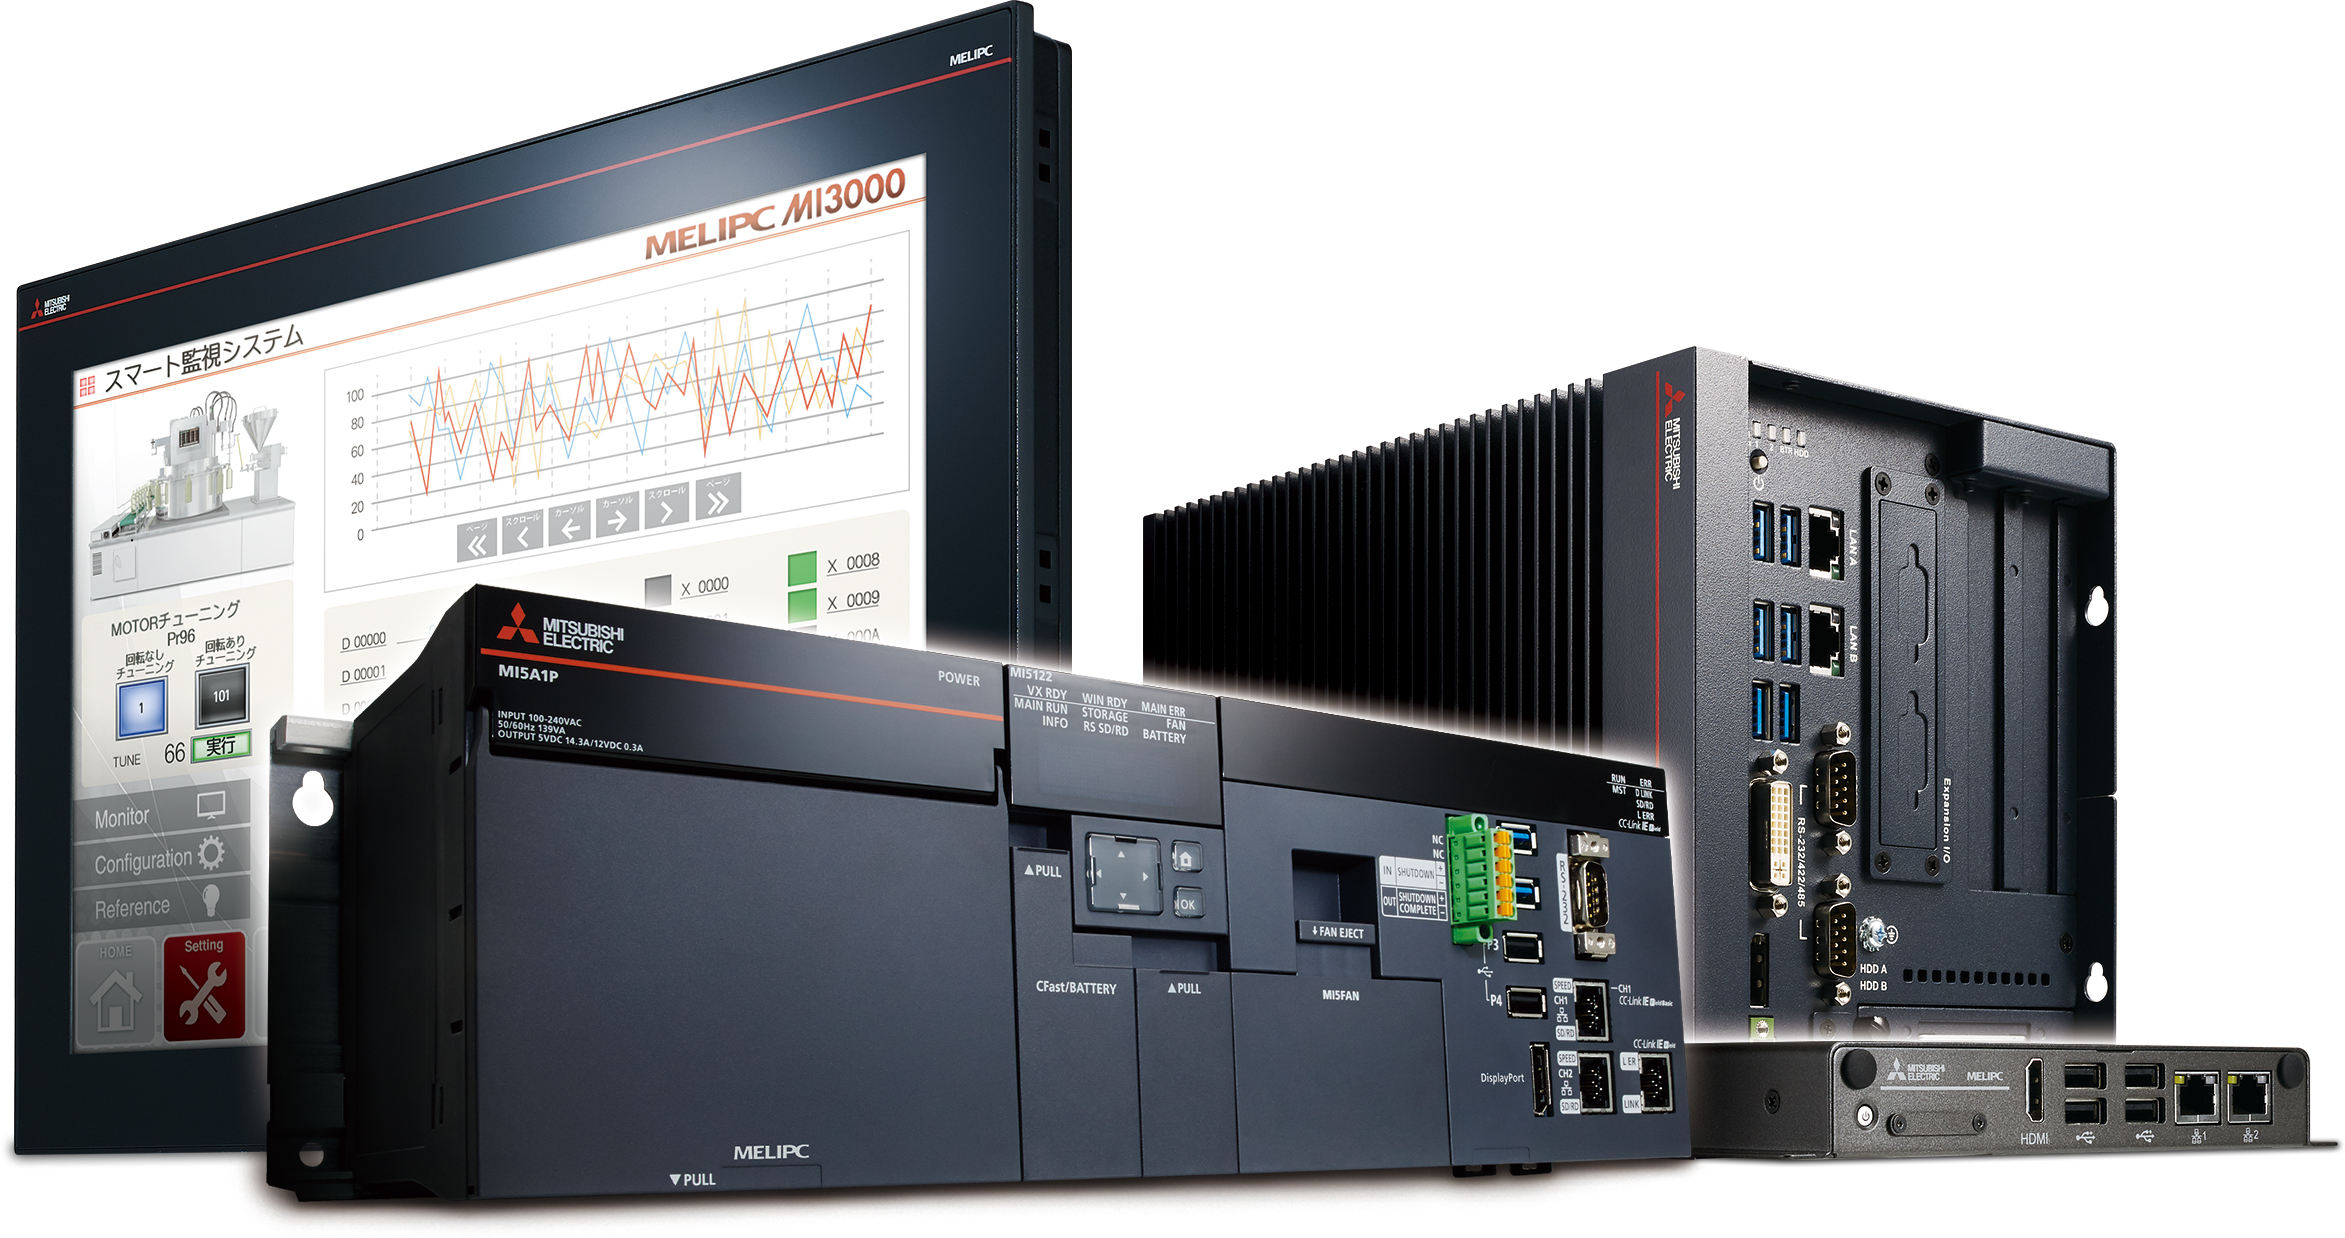 Real-time control, predictive maintenance, improved quality and enhanced productivity can all be enabled with the Mitsubishi Electric MELIPC edge computing solution. [Source: Mitsubishi Electric Europe B.V.]